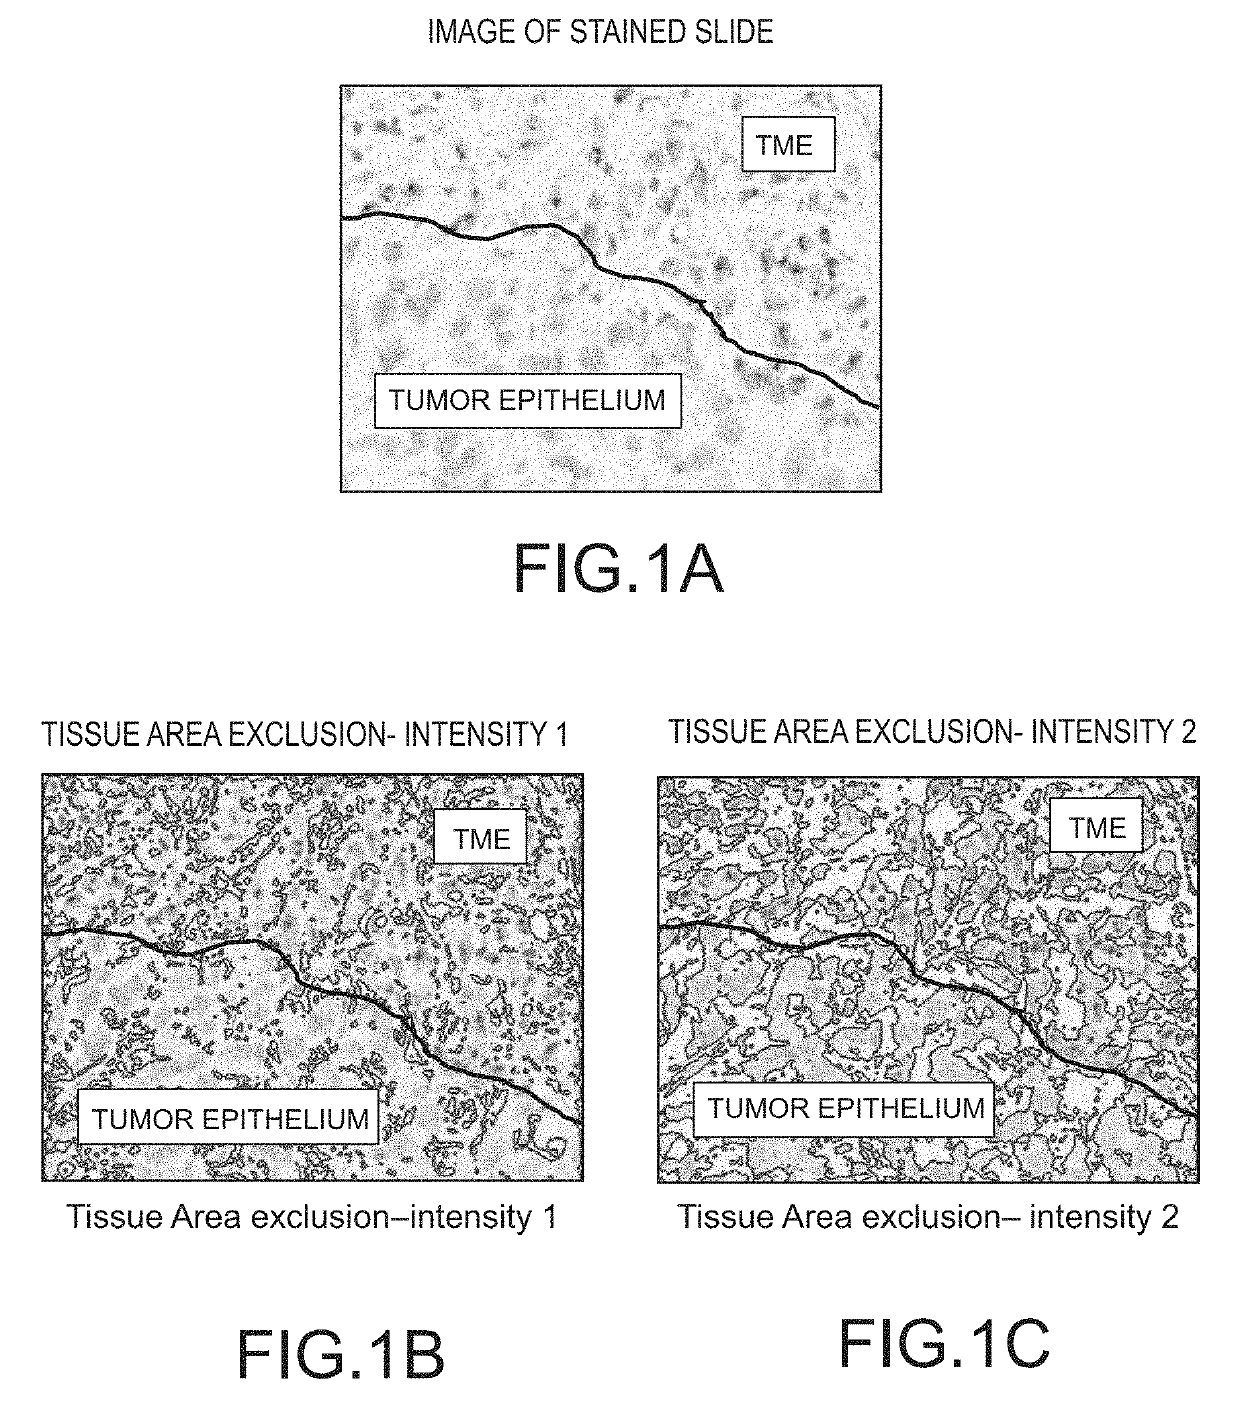 Method for assigning tissue normalization factors for digital image analysis